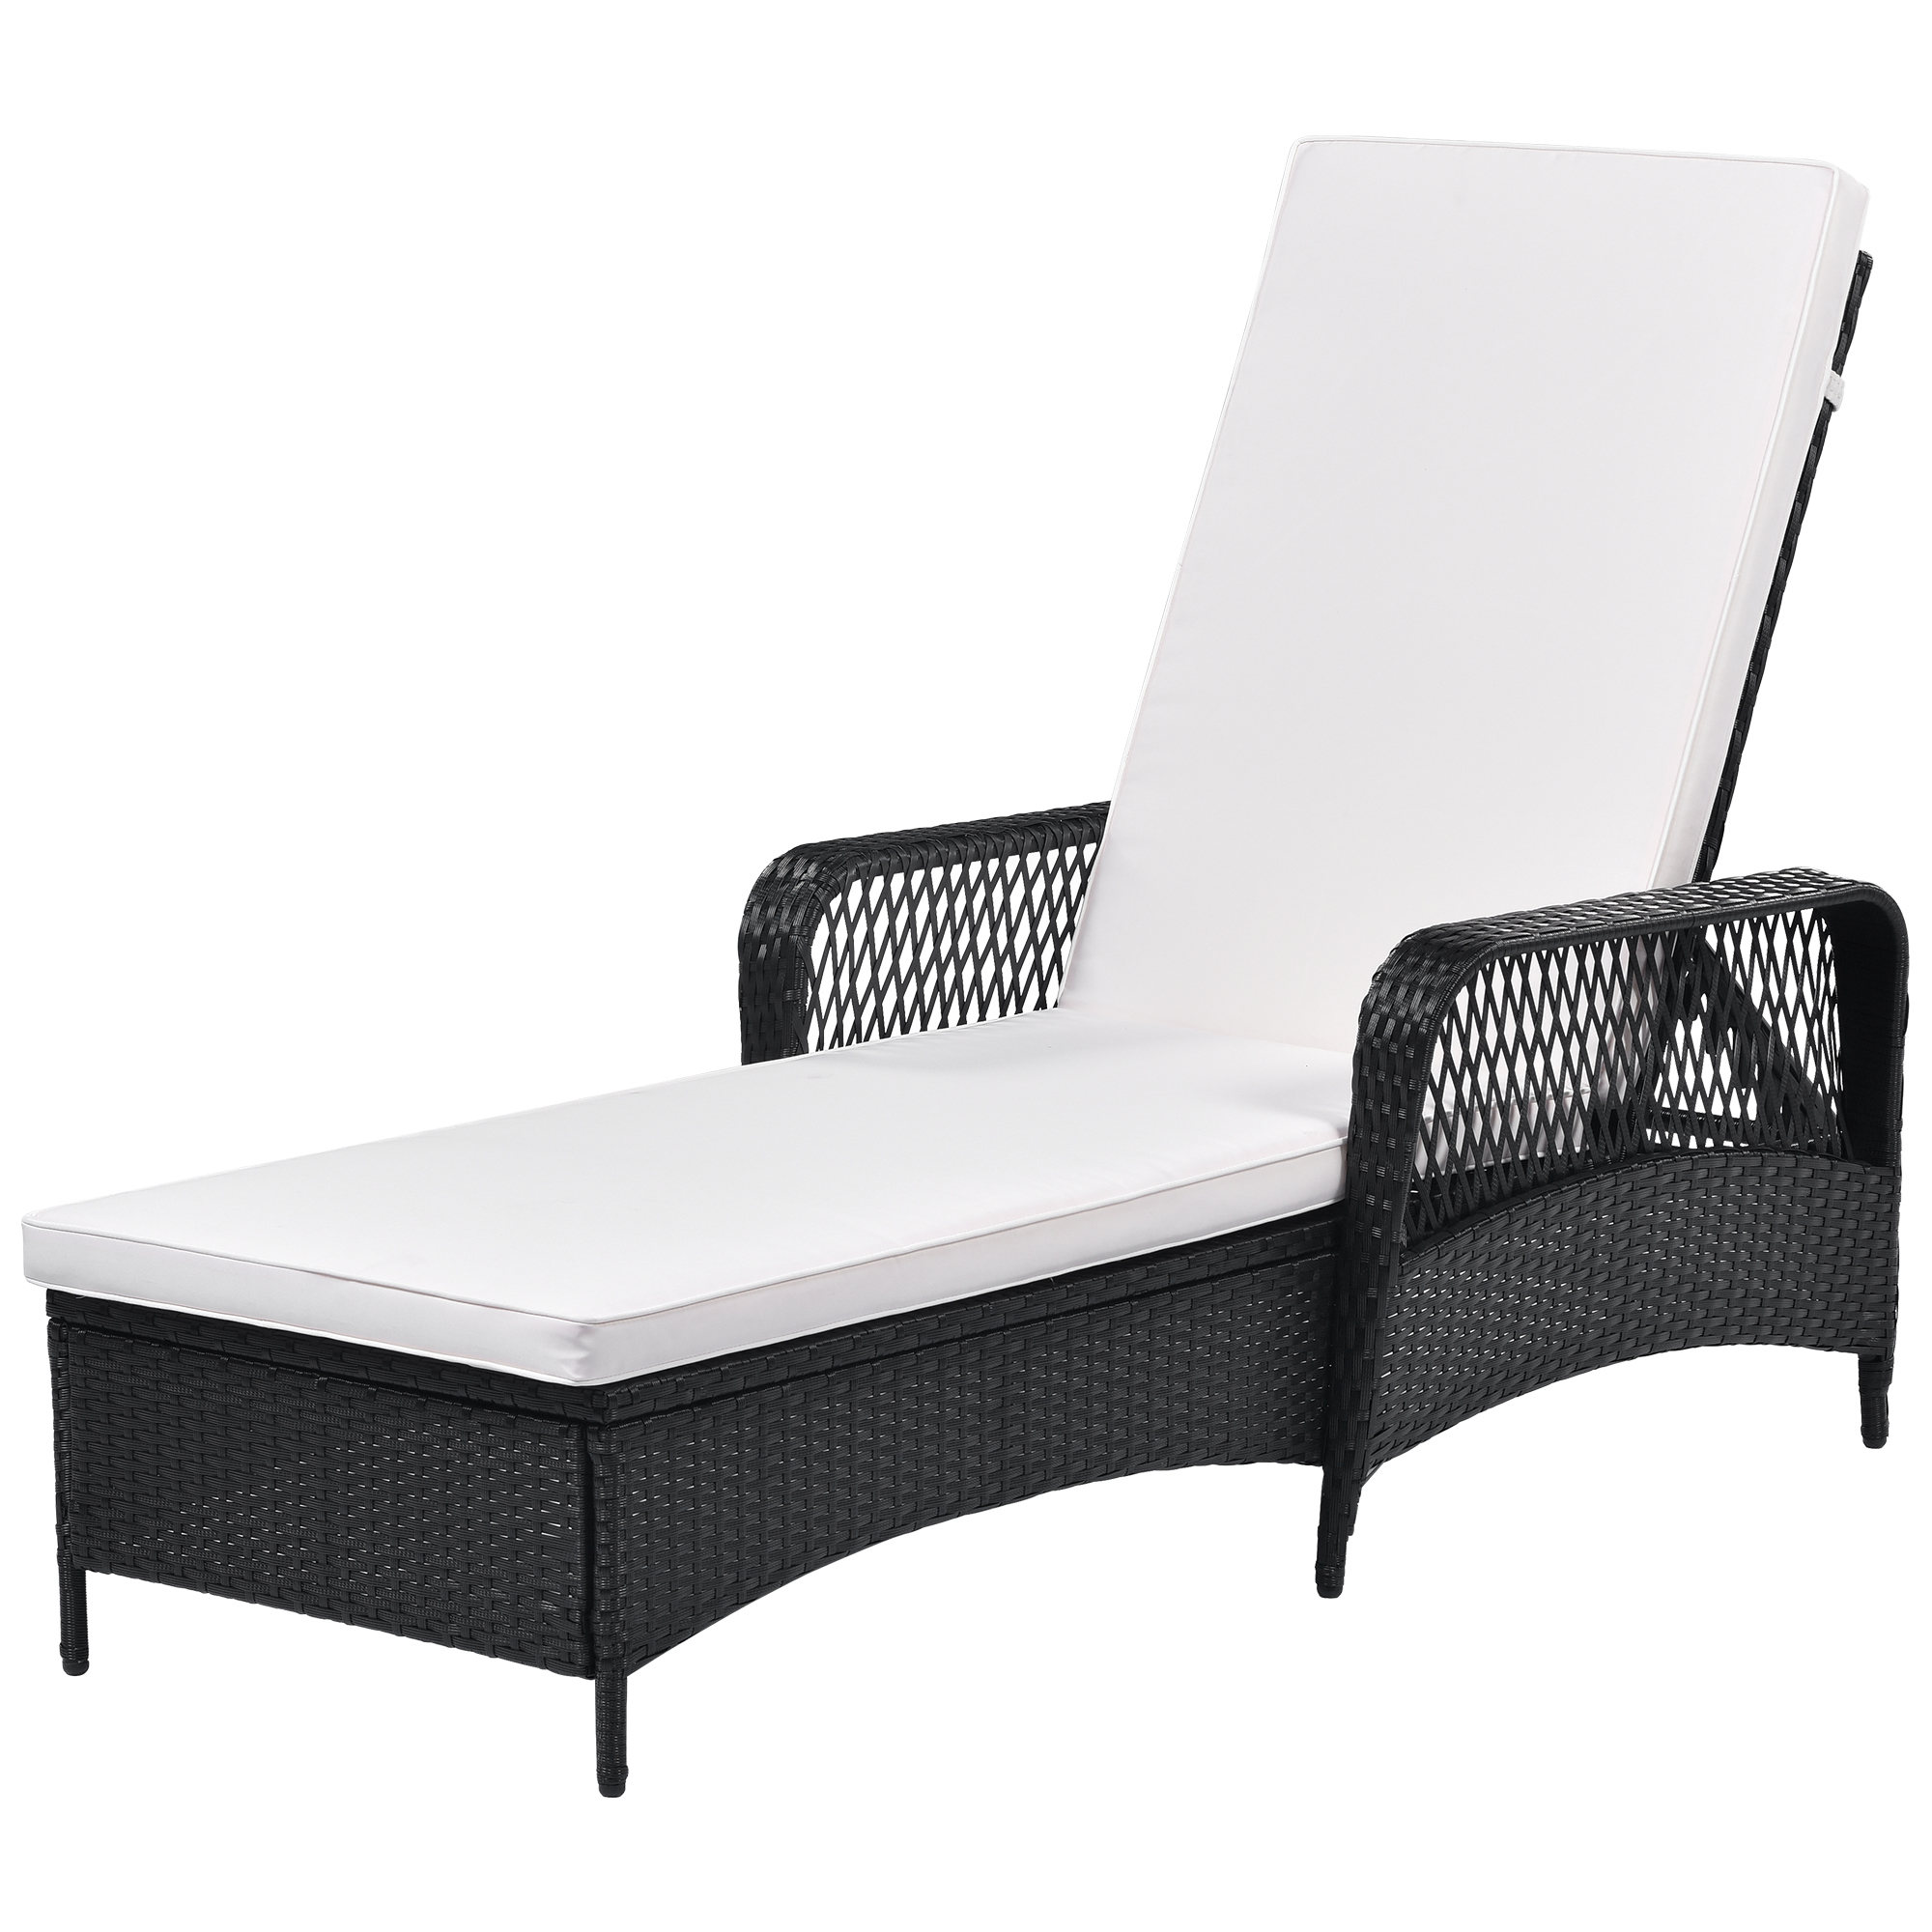 Outdoor Patio Reclining Chair Sunbed with Adjustable Backrest, Black Wicker All-Weather Chaise Lounge Chair for Garden Yard Patio - image 2 of 8